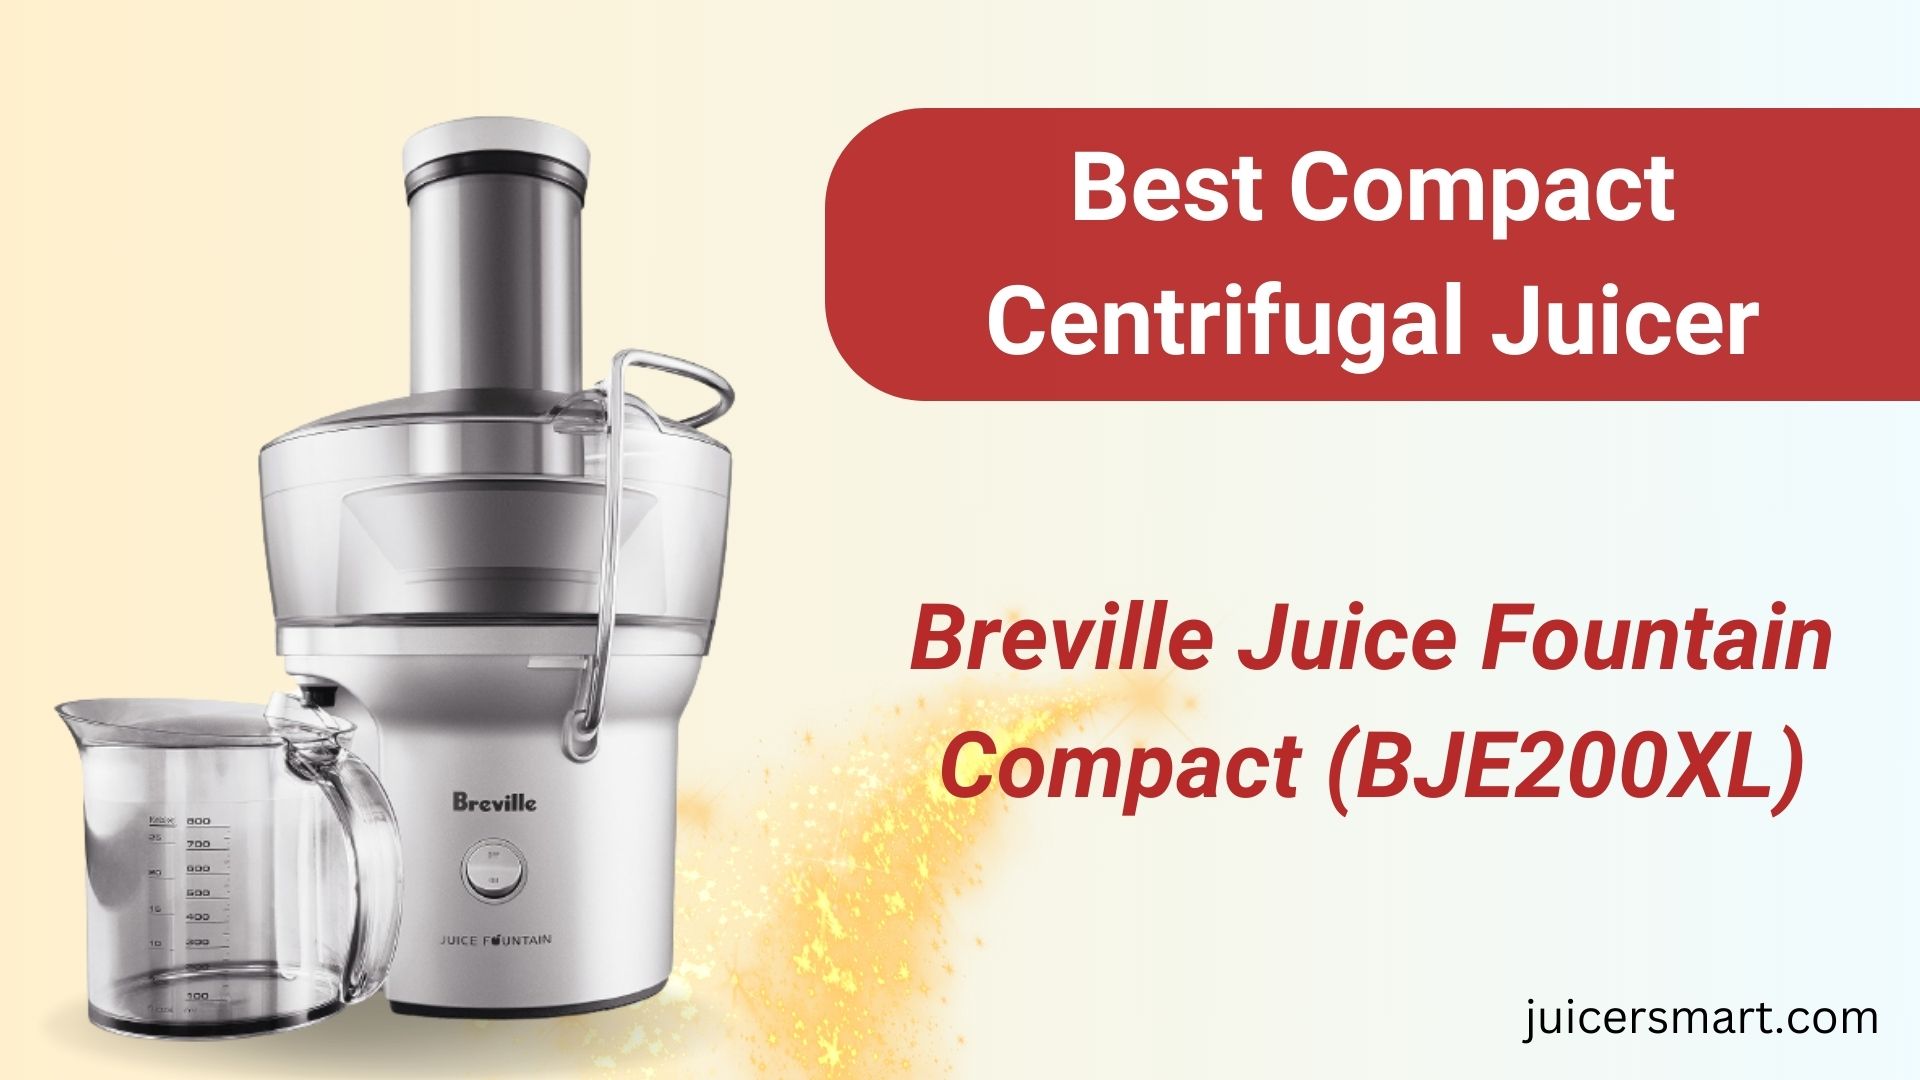 Best Compact Centrifugal Juicer